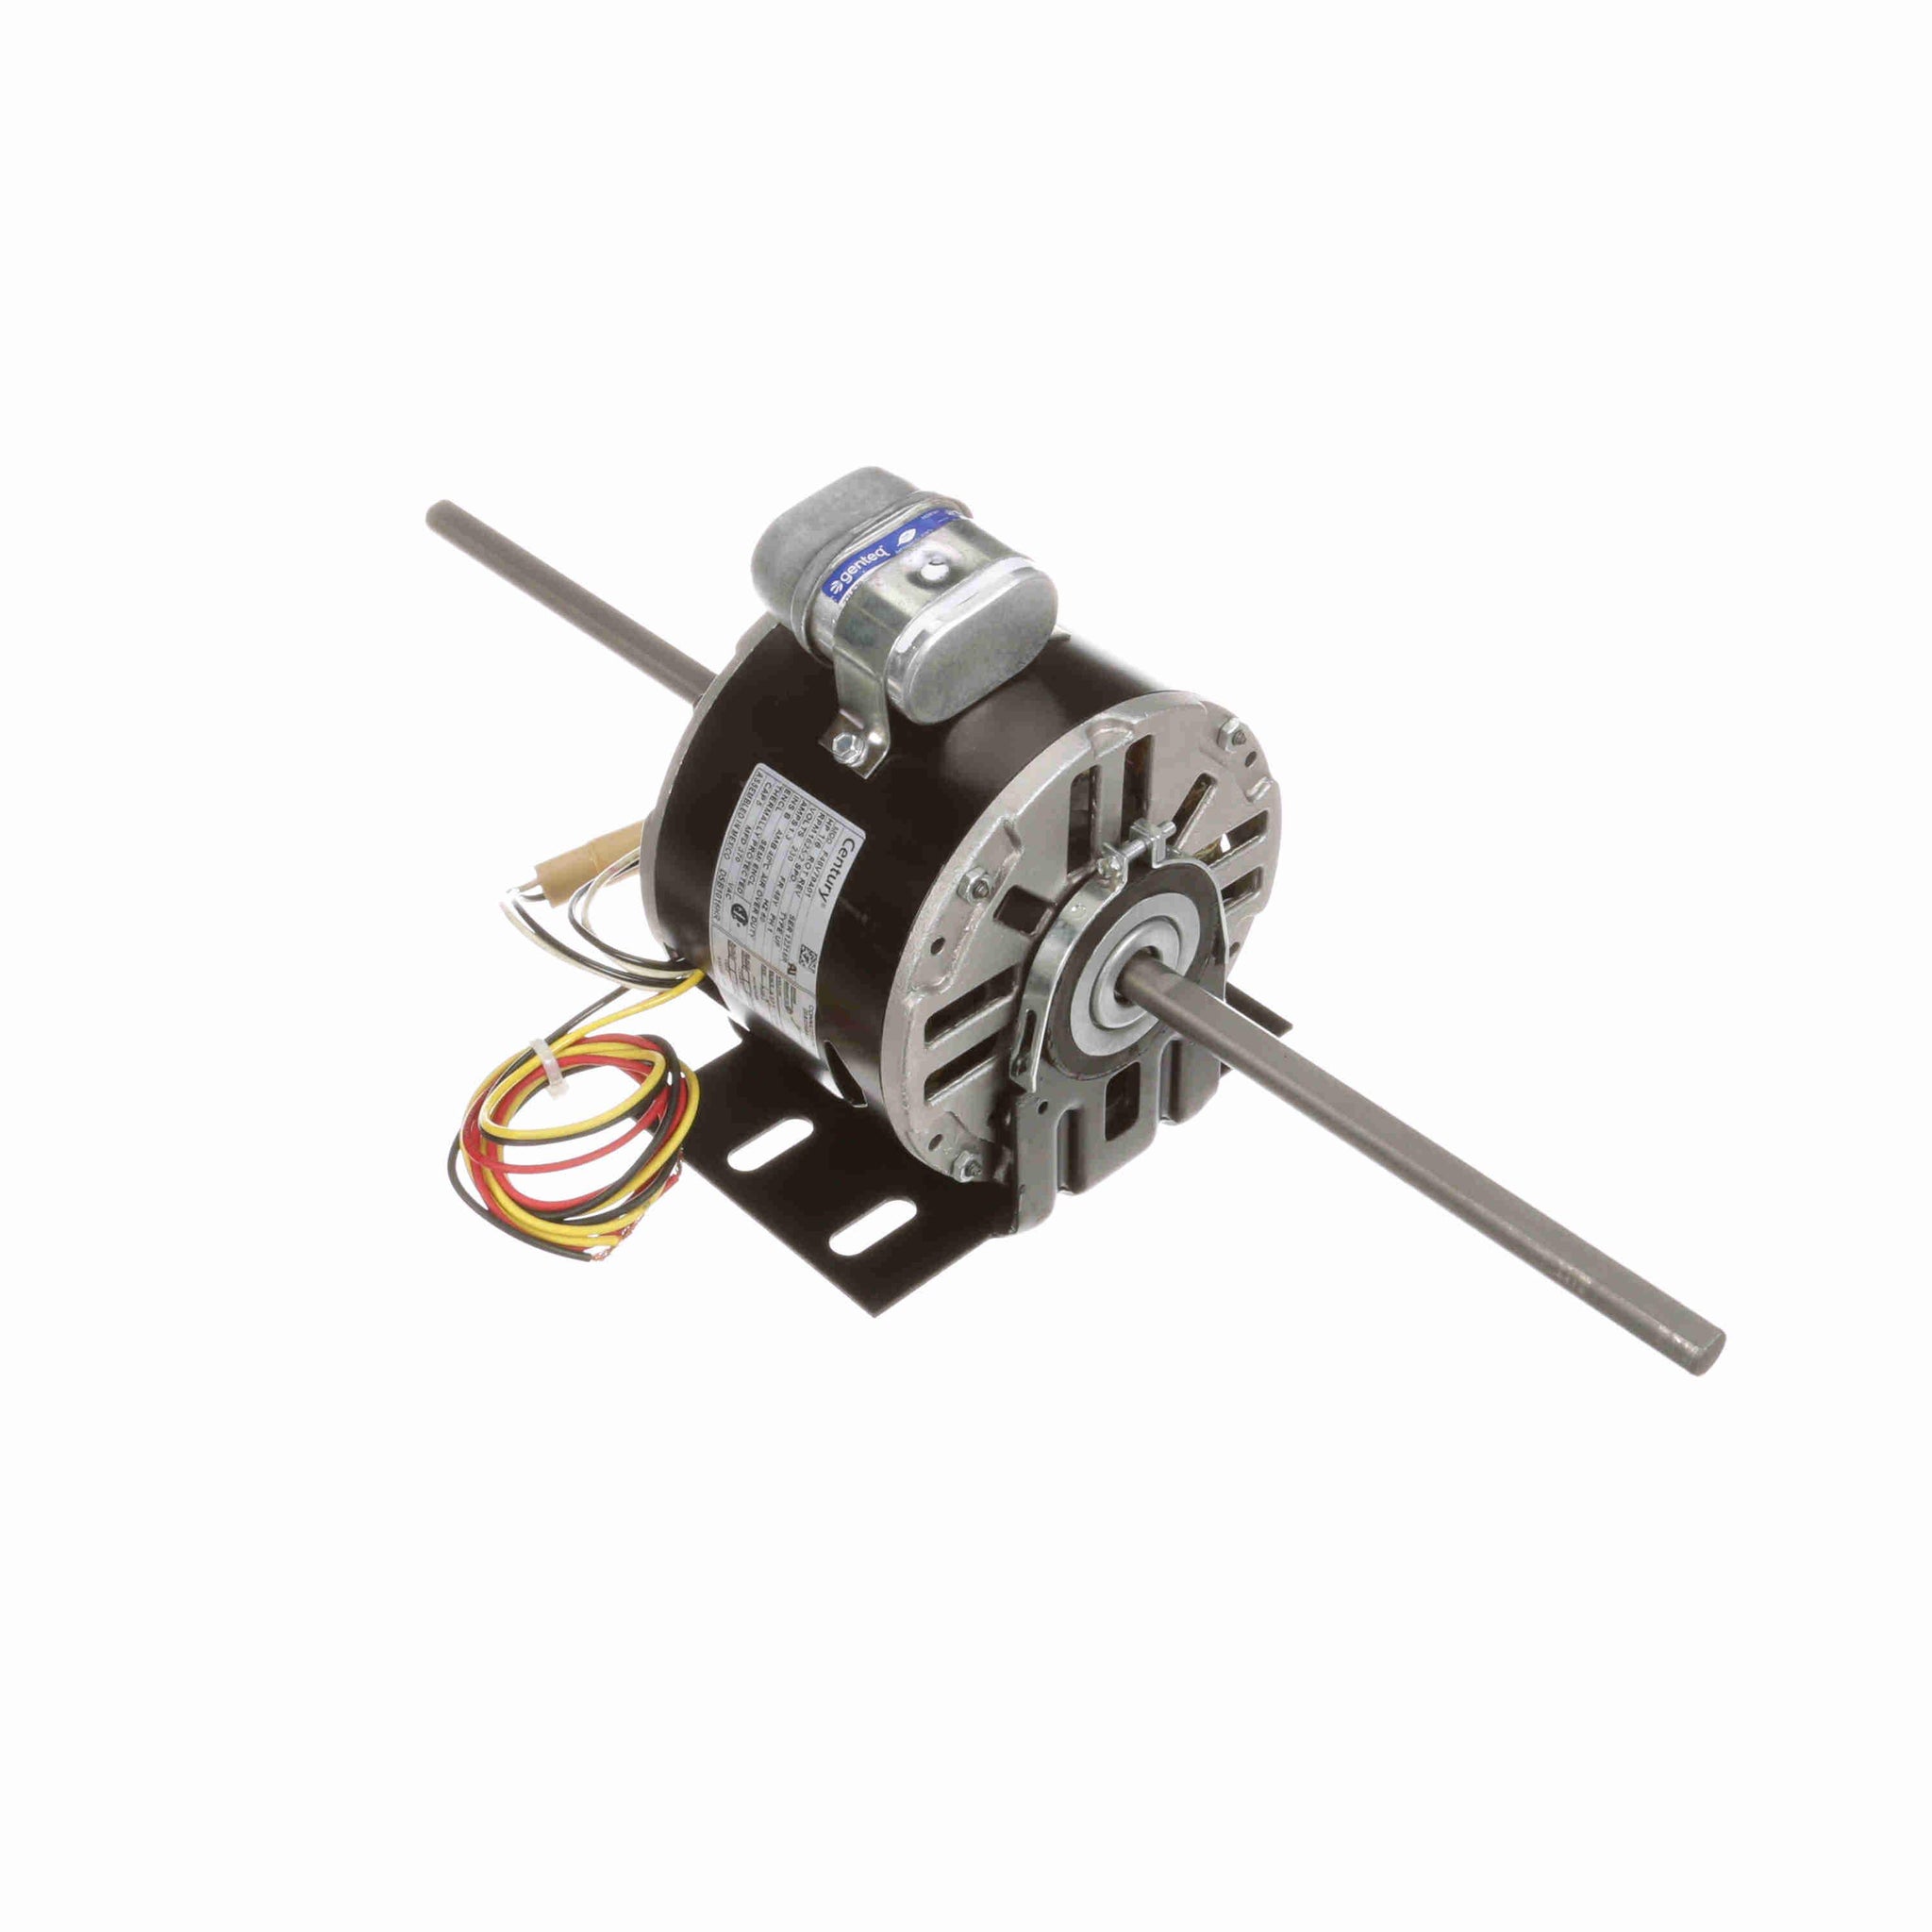 DSB1016HR - 1/6 HP Fan Coil / Room Air Conditioner Motor, 1625 RPM, 2 Speed, 230 Volts, 48 Frame, Semi Enclosed - Hardware & Moreee